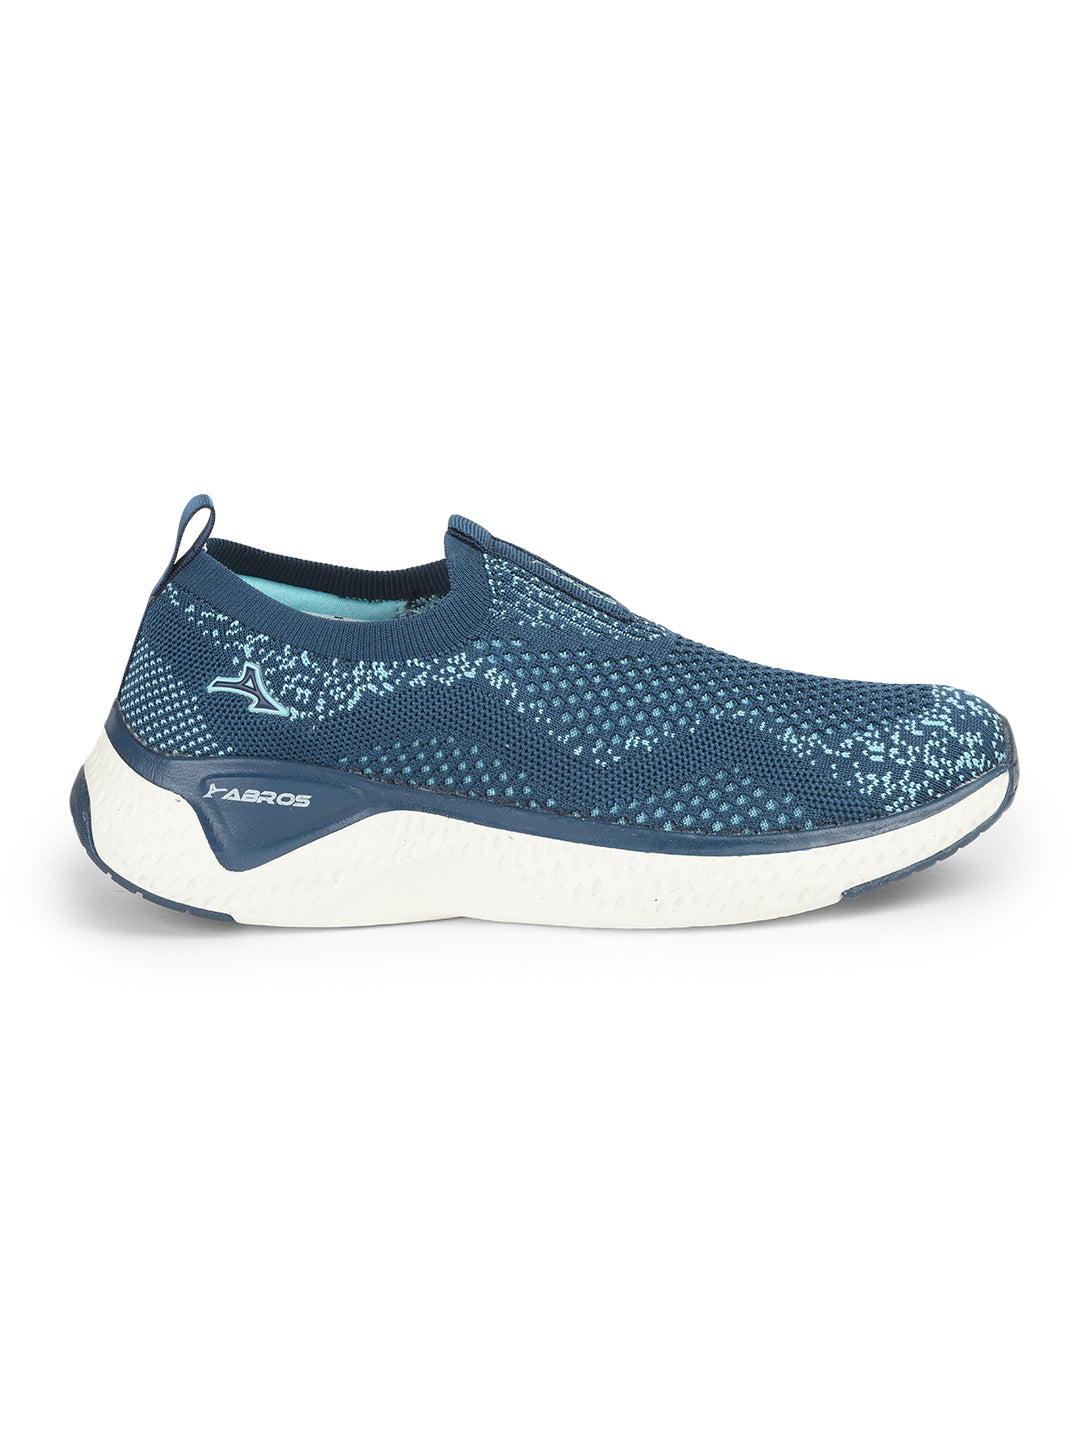 PEARL-N SPORTS SHOES FOR WOMEN